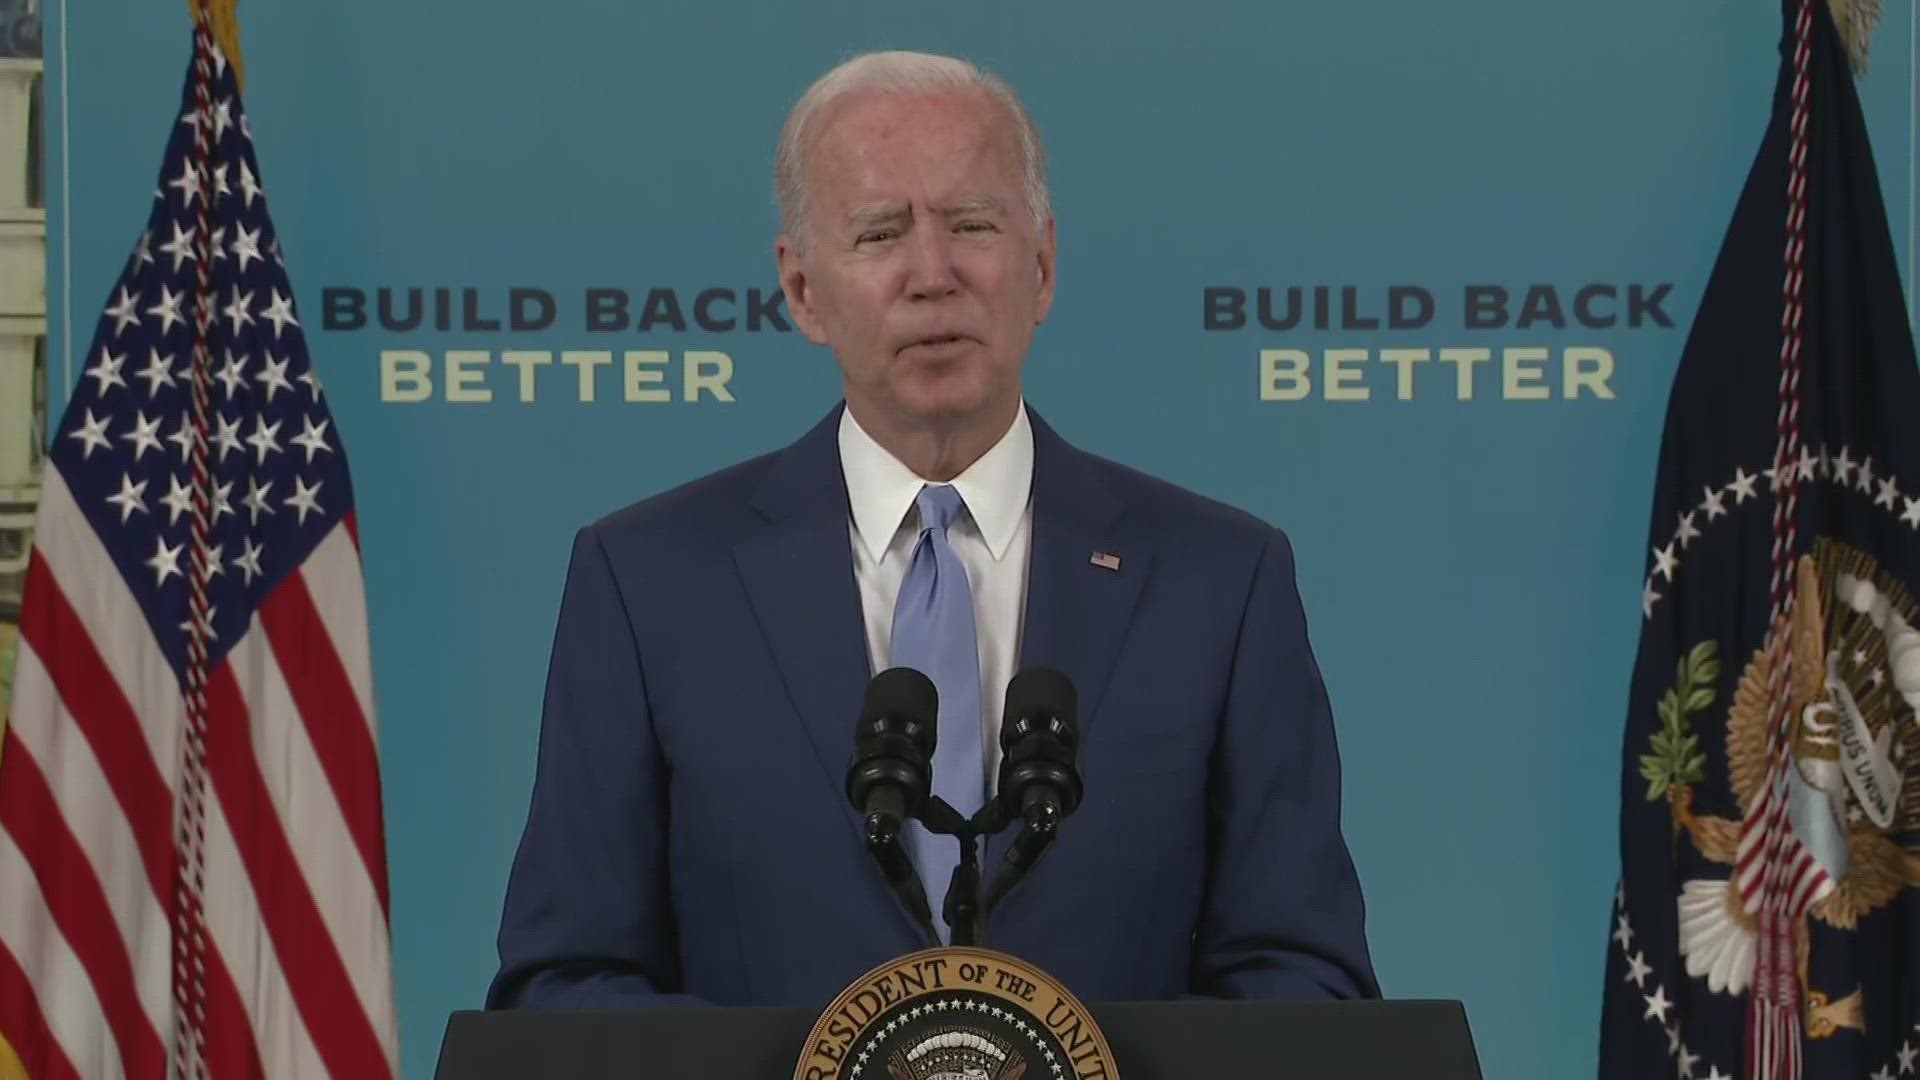 Speaking about progress and the September jobs report Friday, President Joe Biden said the country needs to make investments to move forward.